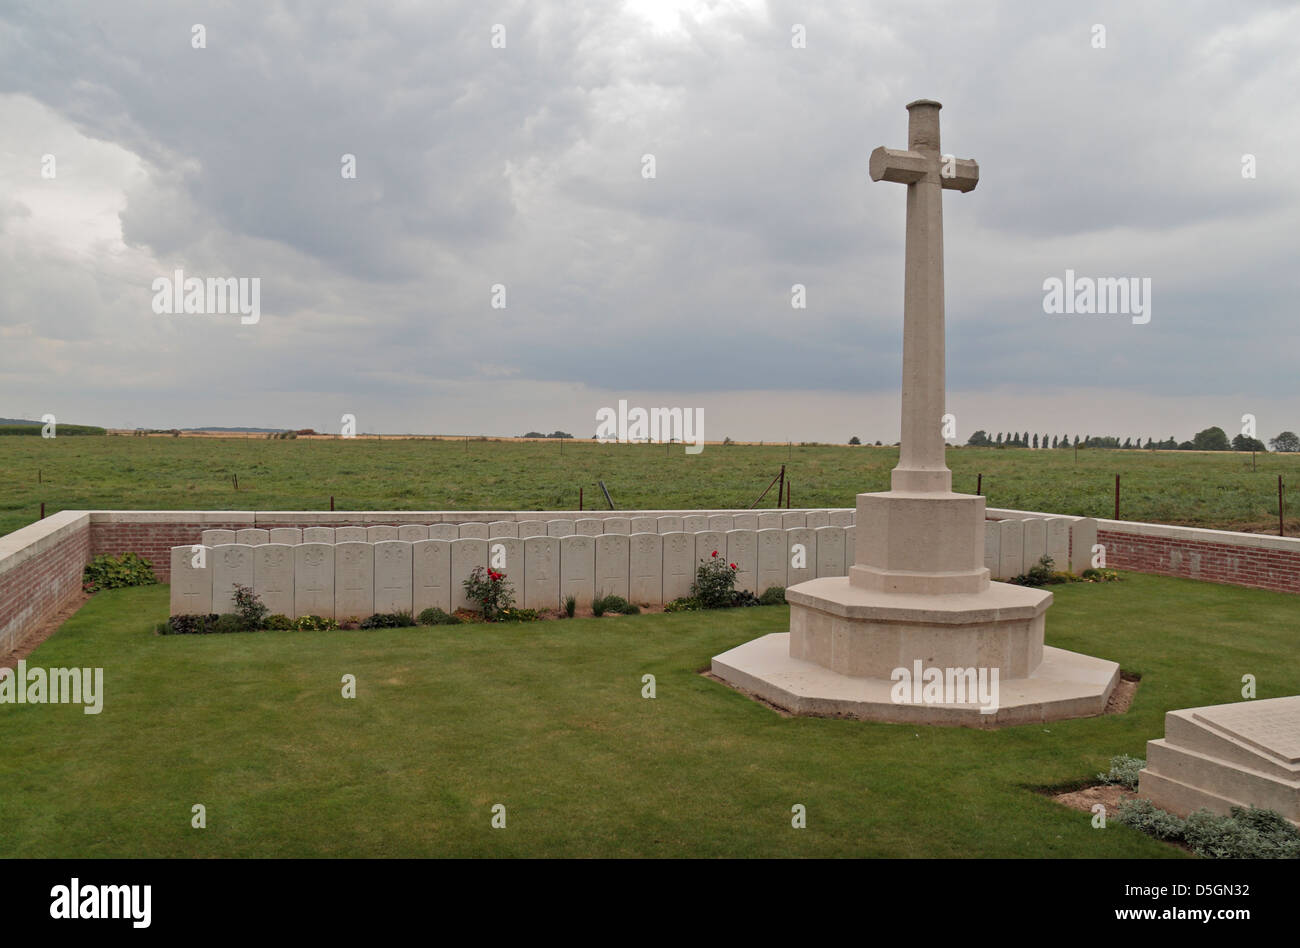 Cross of Sacrifice and headstones in Morval British Cemetery, Pas de Calais, Picardy, France. Stock Photo